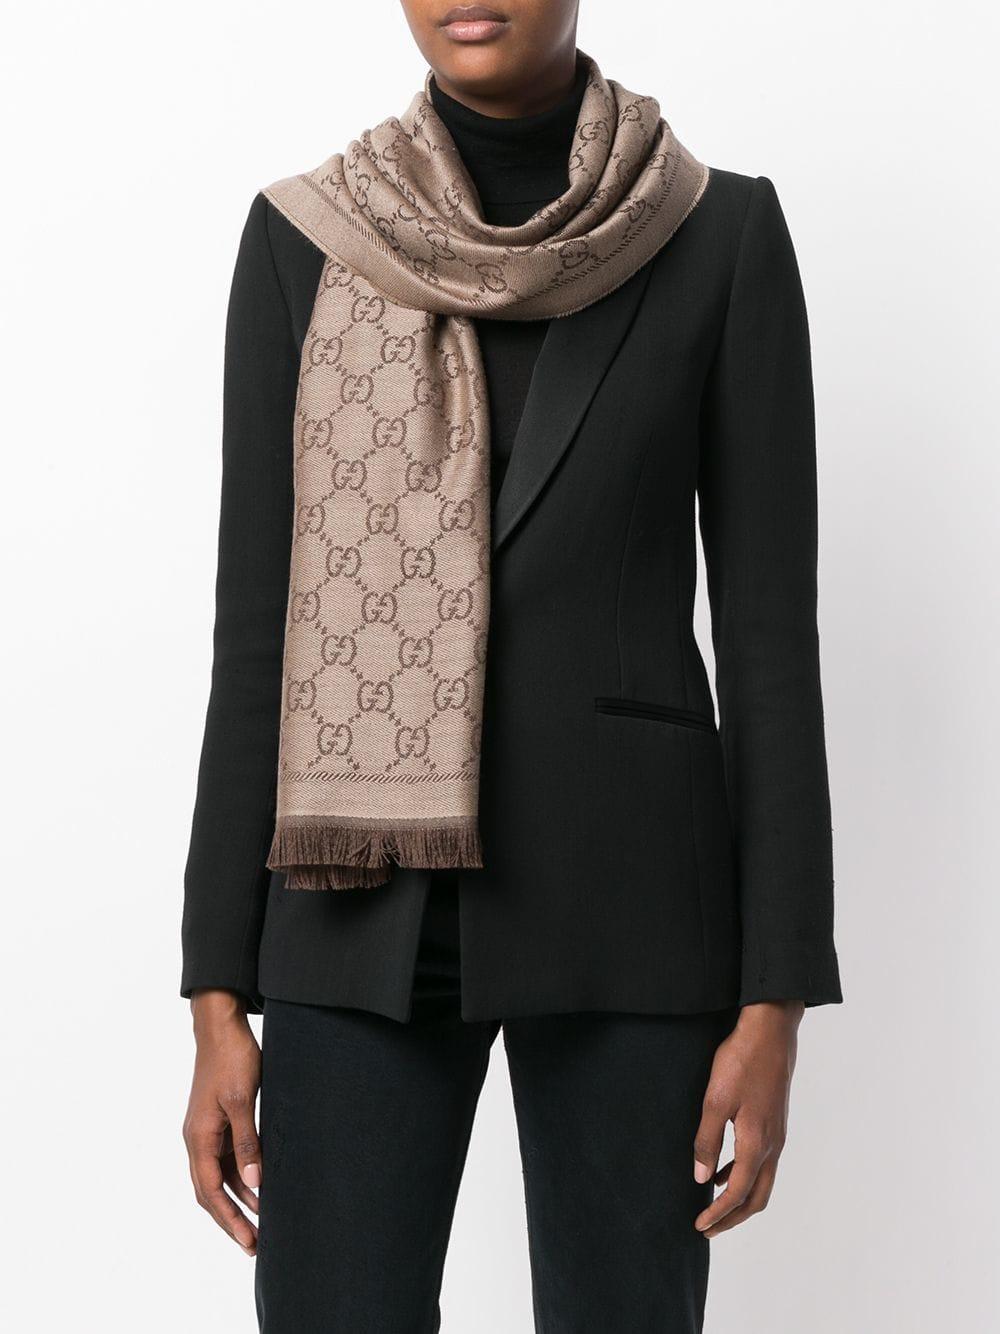 Gucci Wool GG Jacquard Scarf in Brown - Lyst